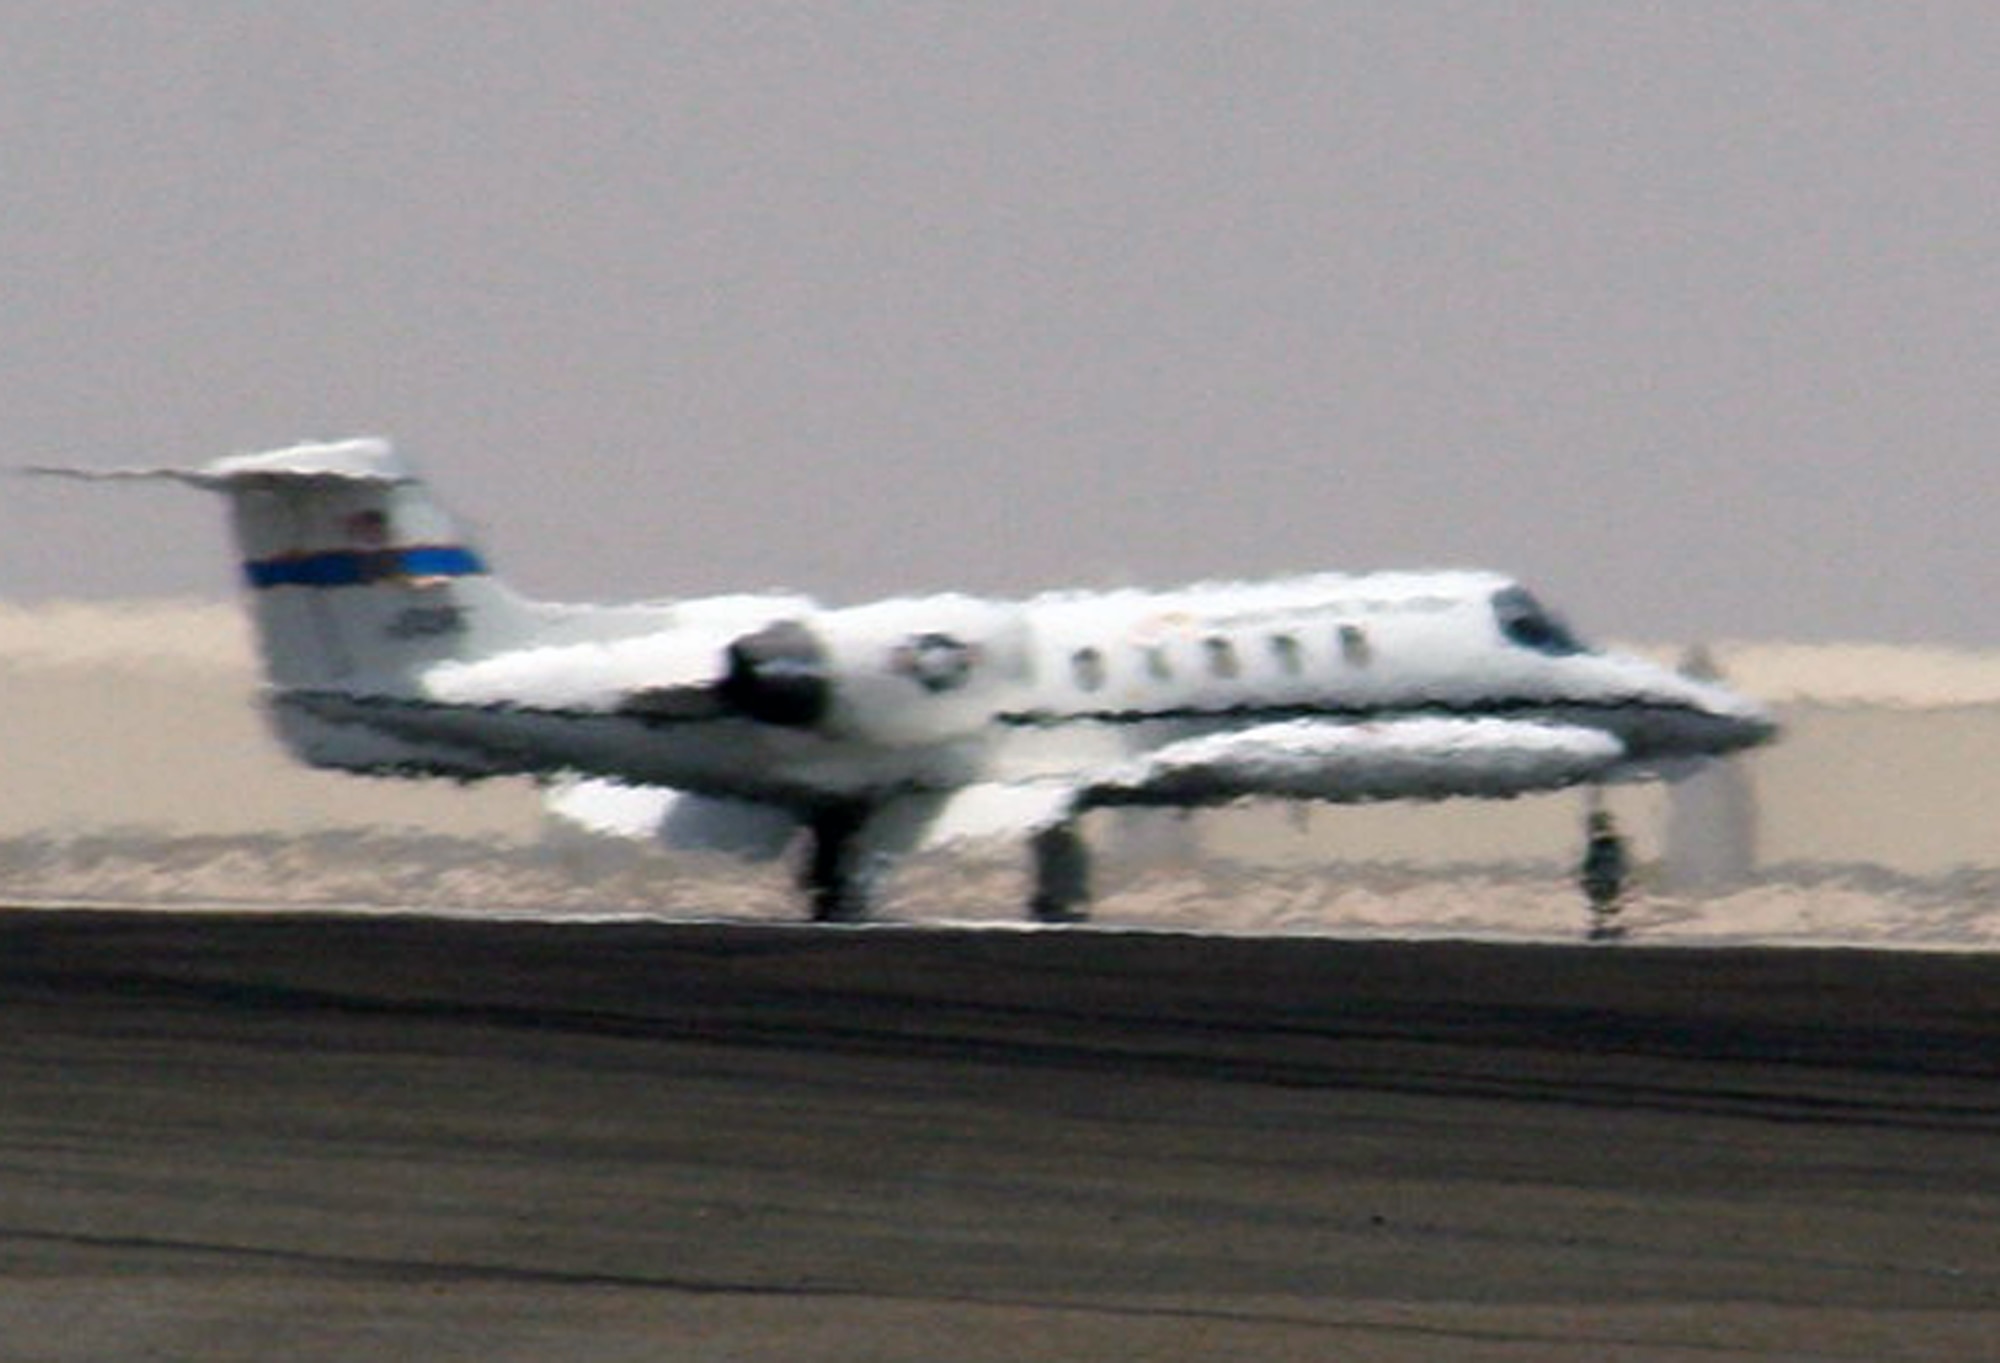 A C-21 passenger jet comes in for a landing to the 380th Air Expeditionary Wing area of operations at a non-disclosed location in Southwest Asia on May 19, 2010.  The C-21, according to its Air Force fact sheet, is a twin turbofan engine aircraft used for cargo and passenger airlift. The aircraft is the military version of the Lear Jet 35A business jet. In addition to providing cargo and passenger airlift, the aircraft is capable of transporting one litter or five ambulatory patients during aeromedical evacuations. The C-21 can carry eight passengers and 42 cubic feet (1.26 cubic meters) of cargo. (U.S. Air Force Photo/Master Sgt. Scott T. Sturkol/Released)